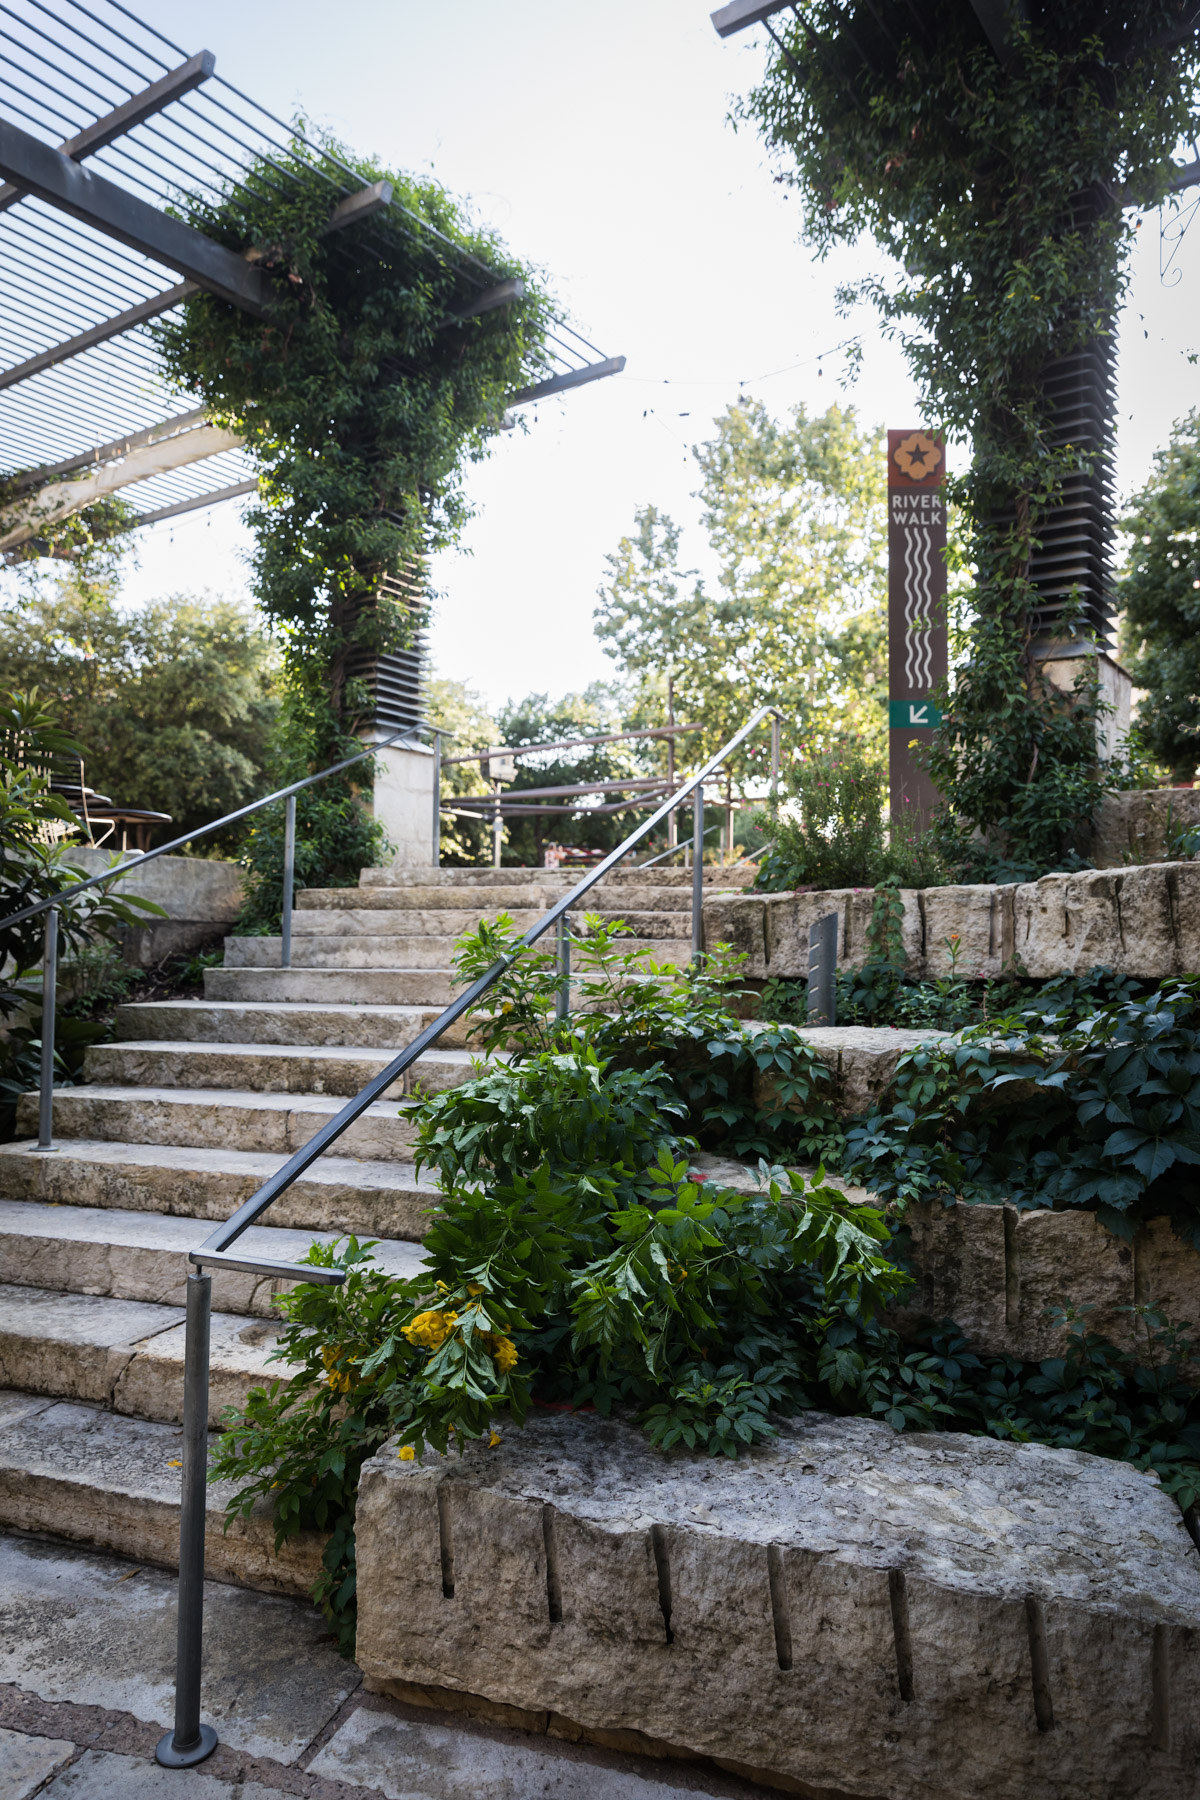 Stone staircase leading to Riverwalk for an article on the perfect downtown San Antonio family portrait itinerary